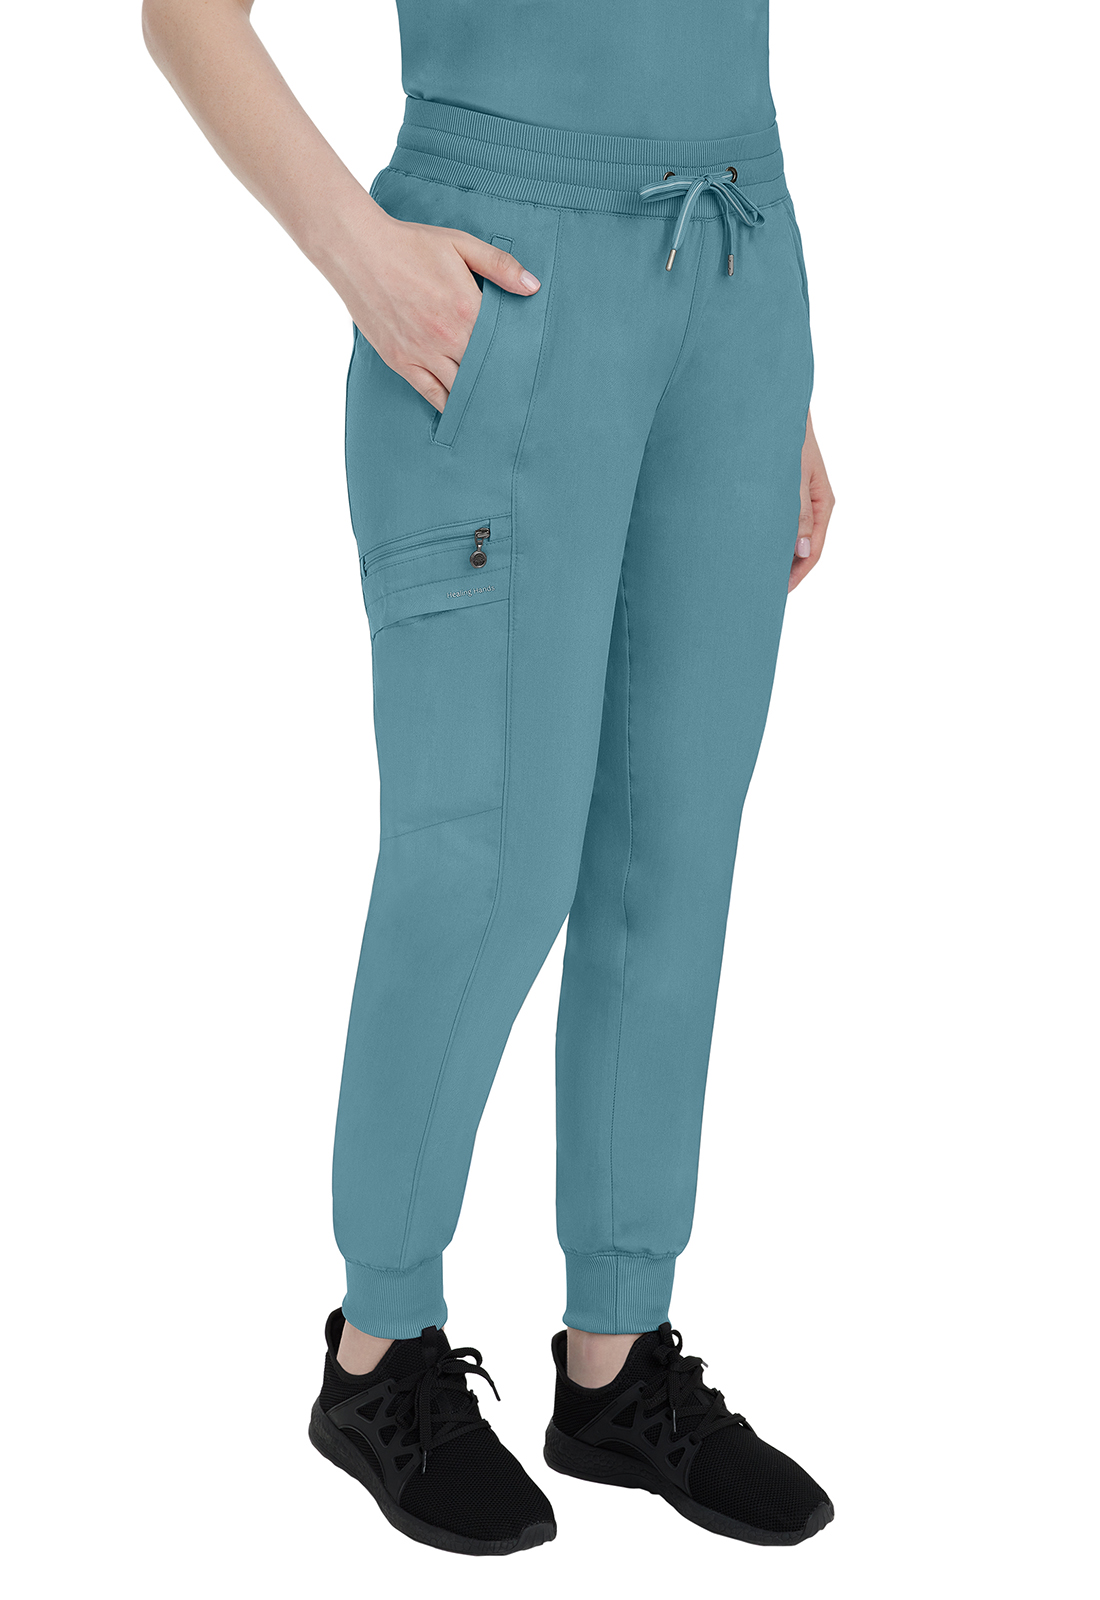 Healing Hands Purple Label Yoga 9244 Toby Jogger Pant - TALL